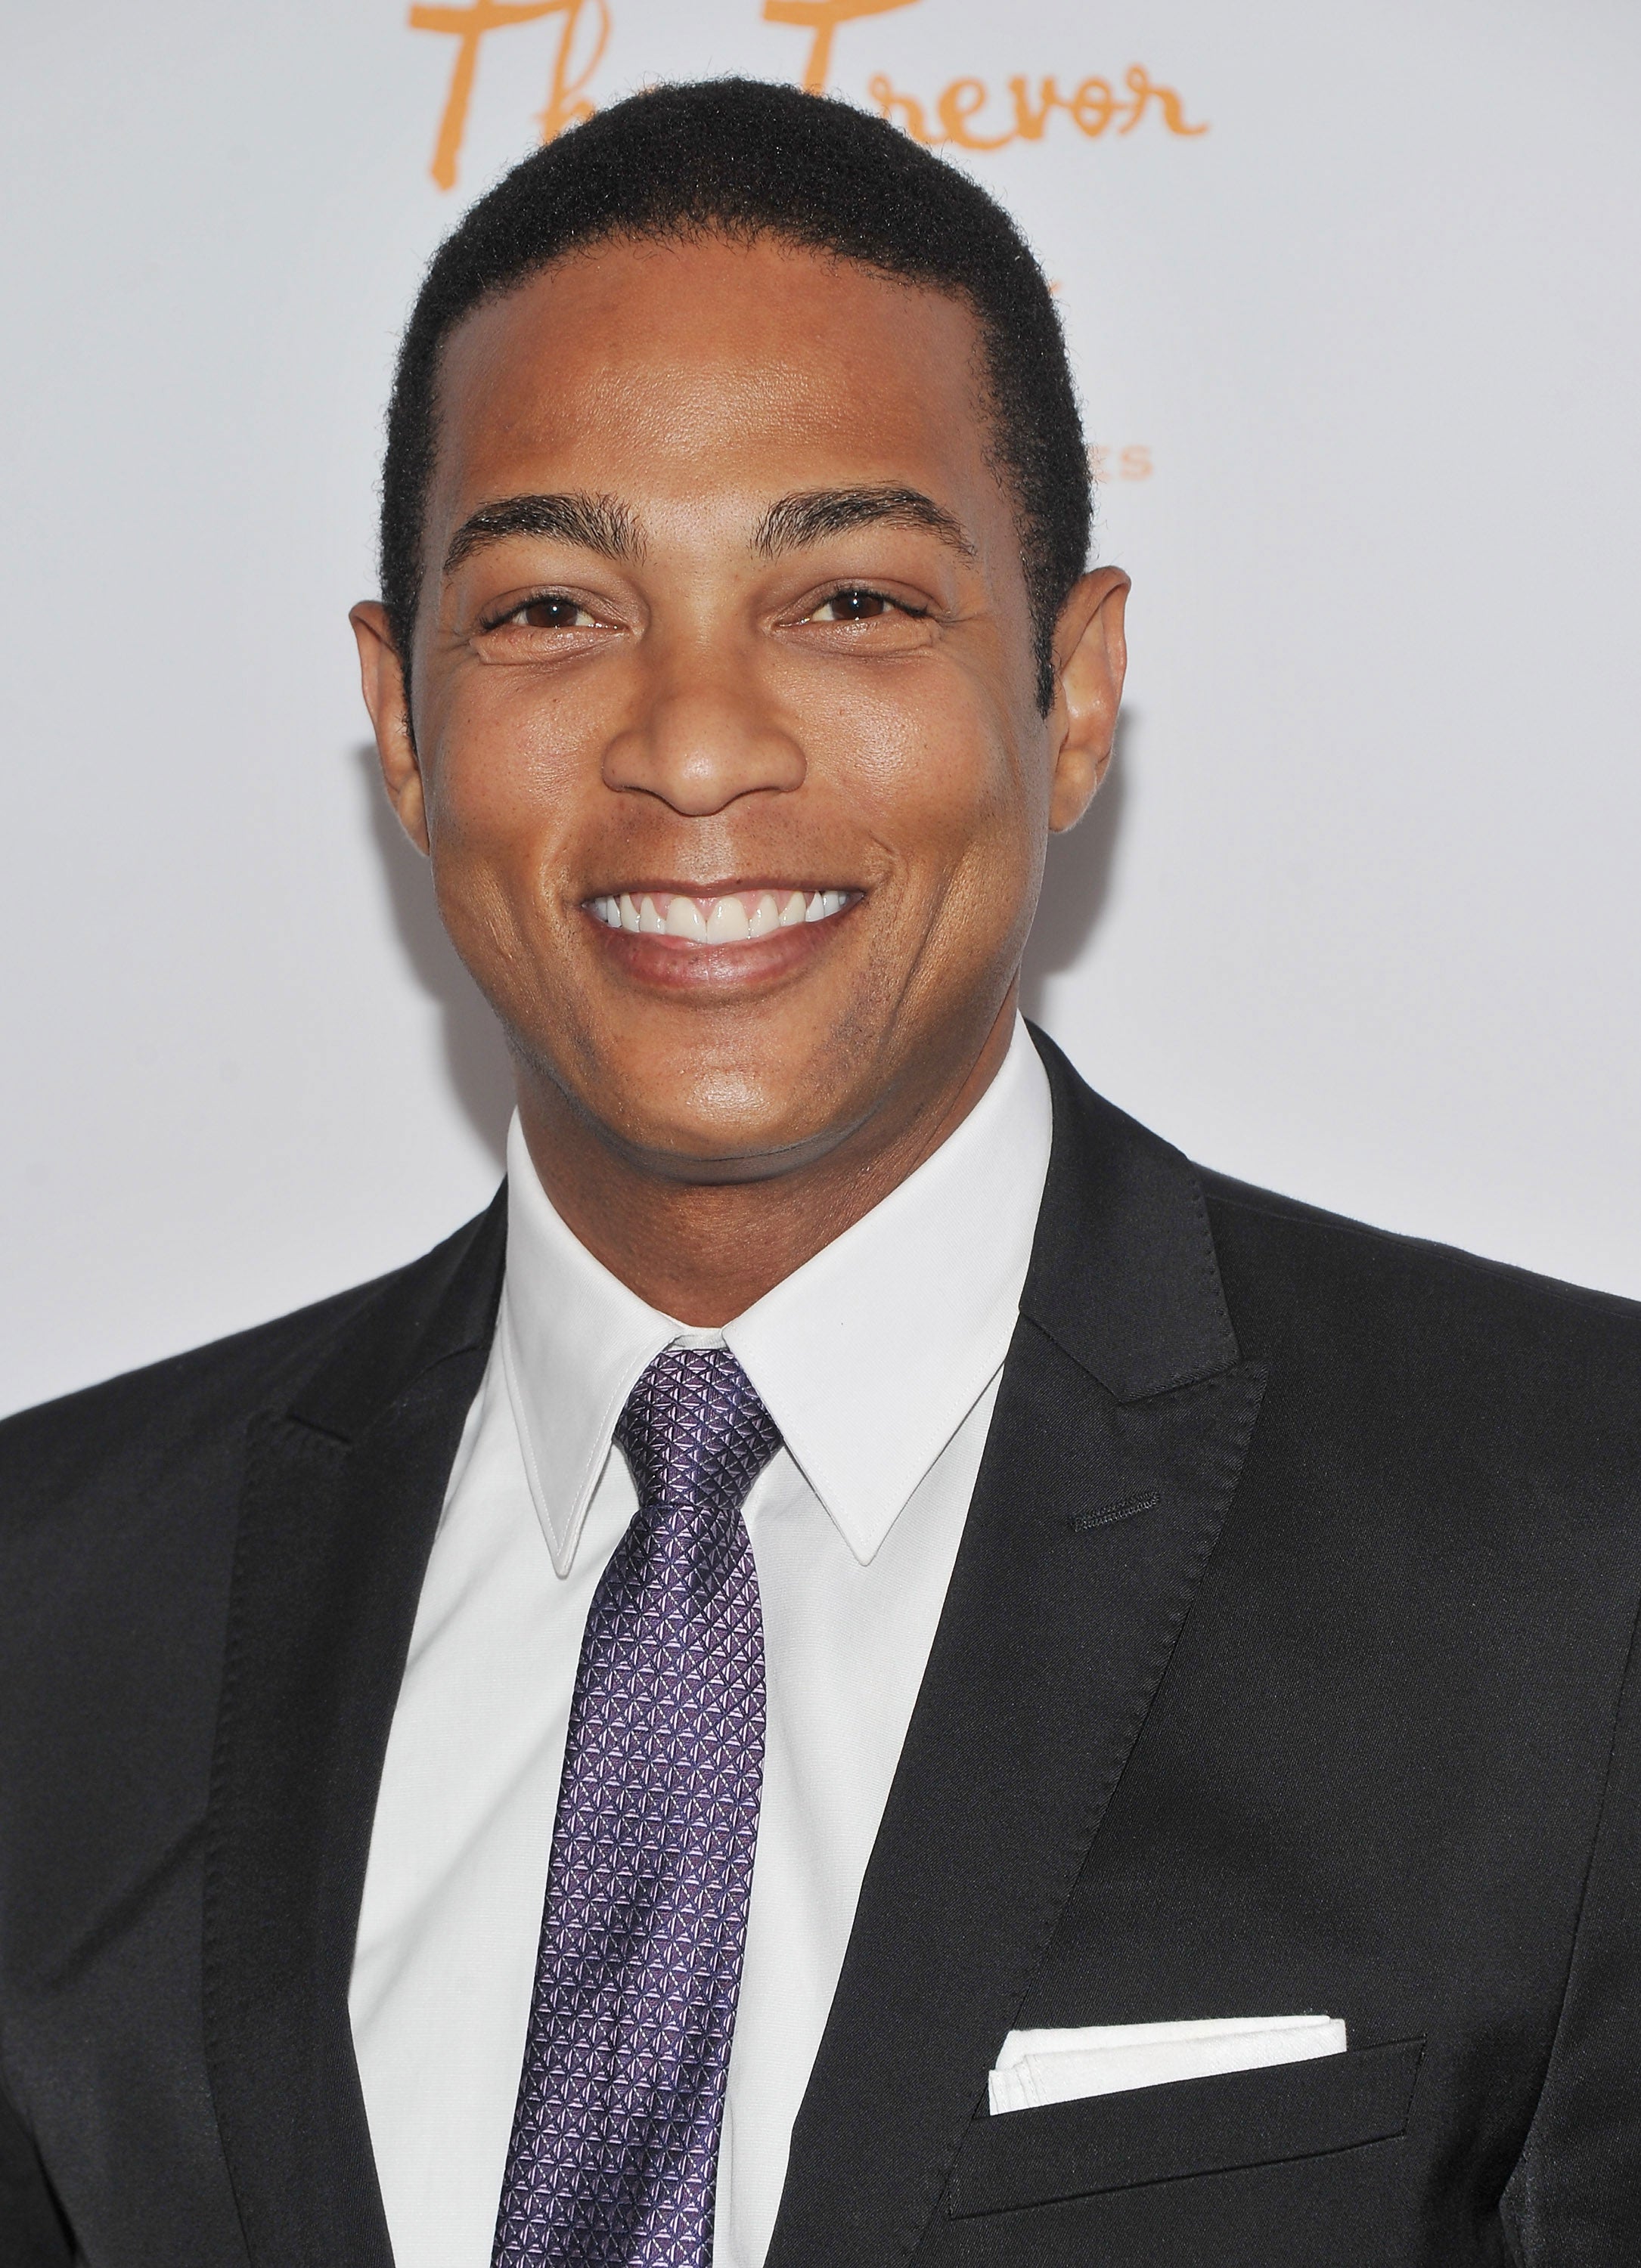 CNN's Don Lemon on His Whitney Houston Special, 'Death of a Diva'